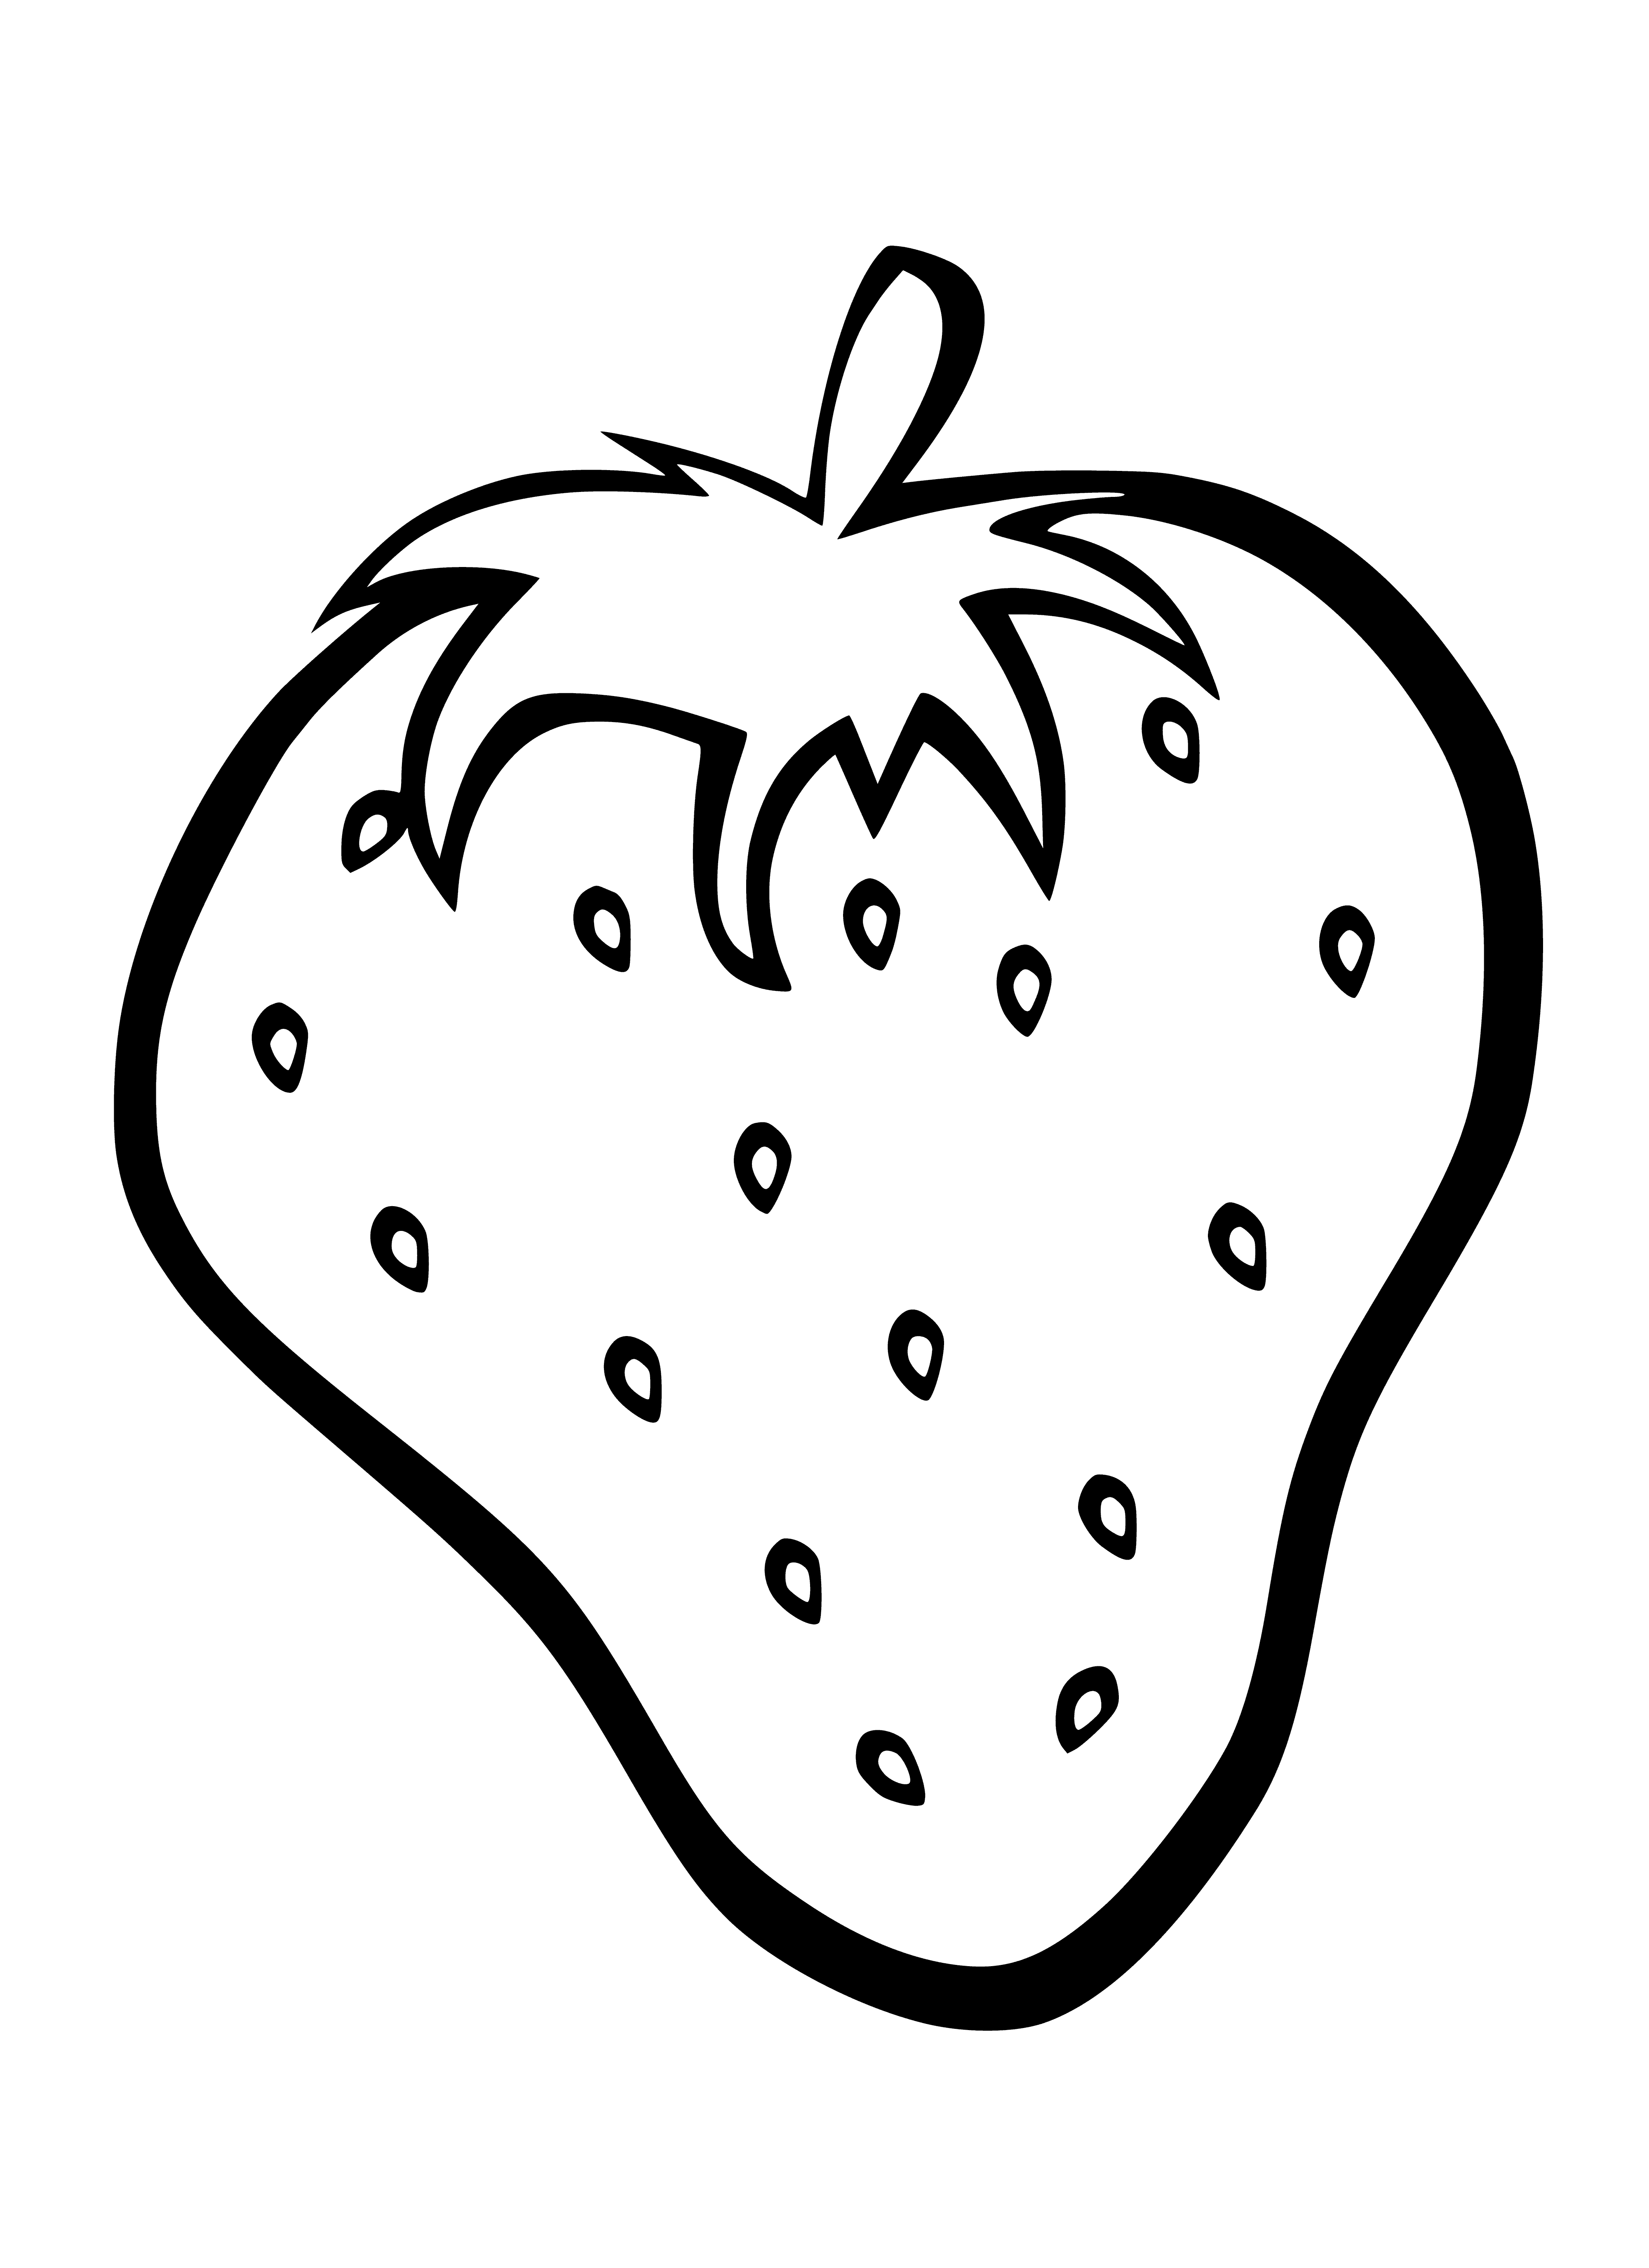 coloring page: Sweet, juicy strawberries are a summer favorite - perfect for a healthy snack or special treat! #berries #strawberries